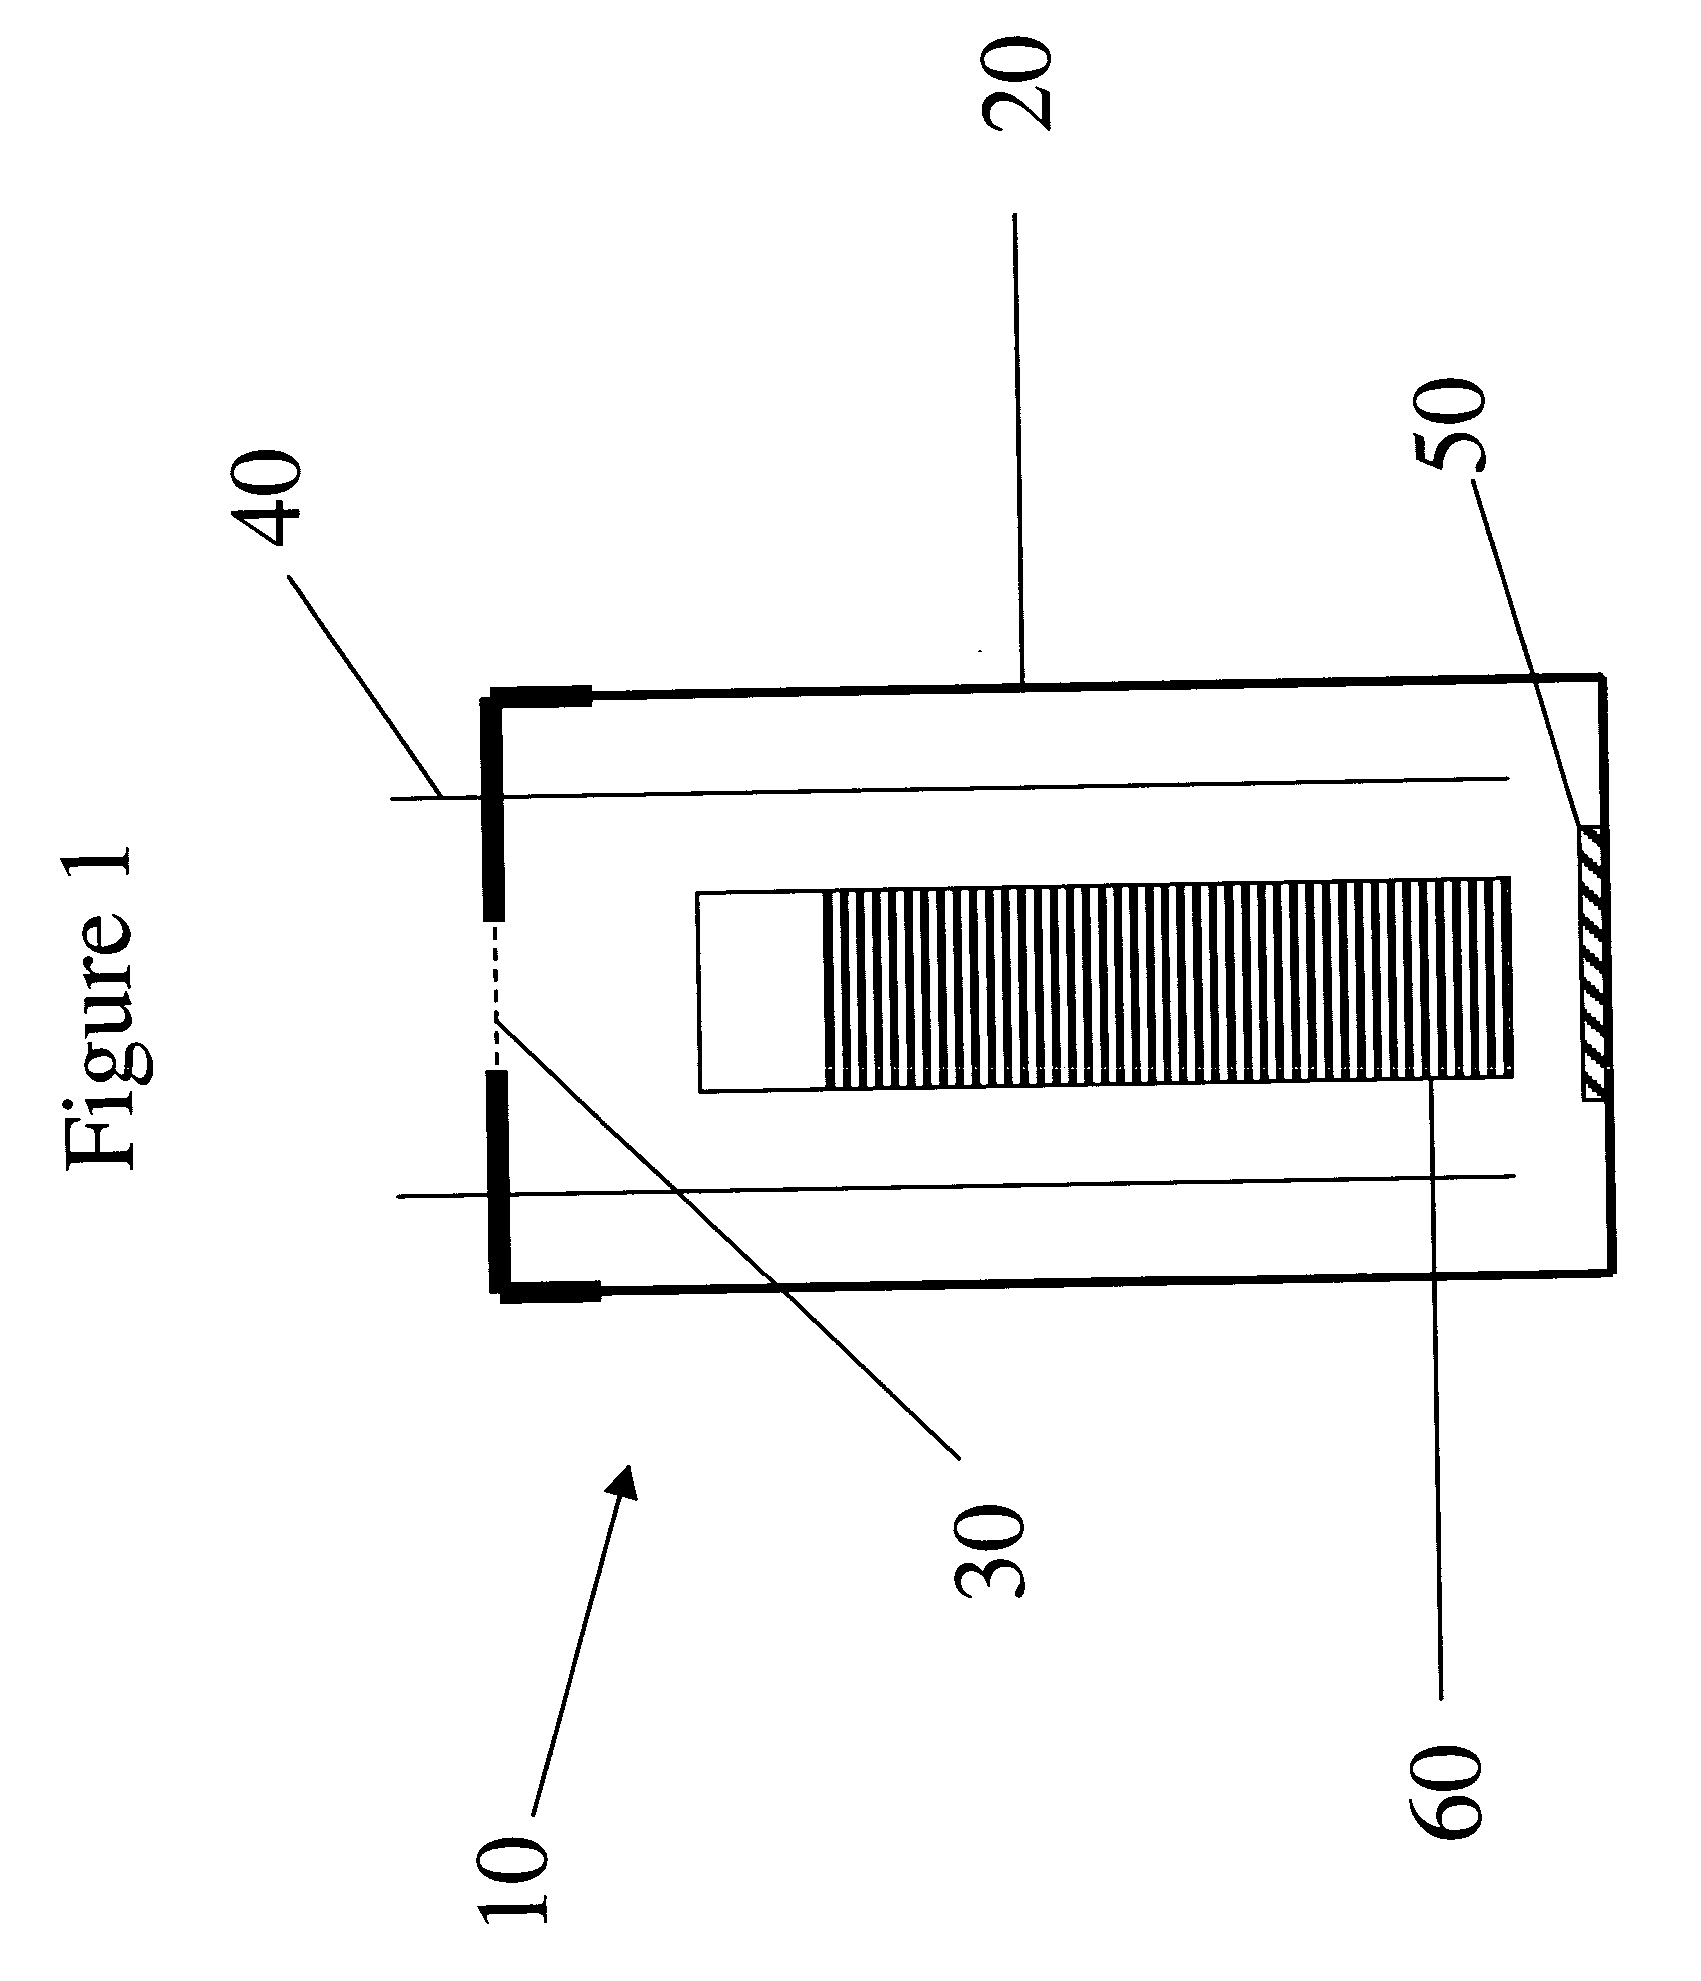 Device and method for rapidly determining the effectiveness of sterilization or disinfection processes